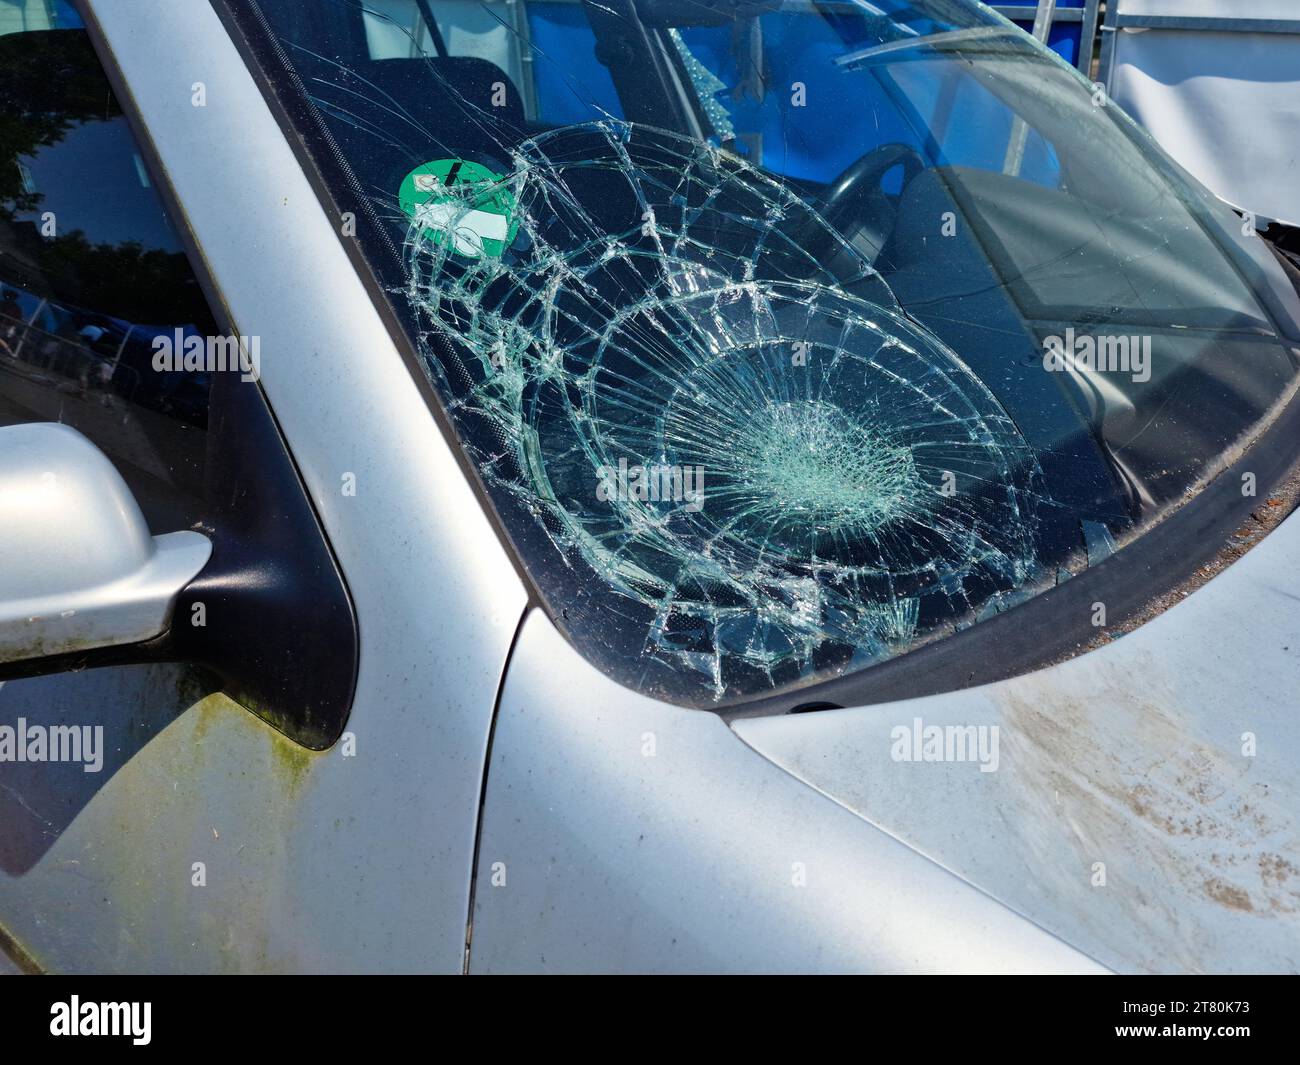 Broken Car Windscreen Or Windshield Window. Smashed Front Glass Stock Photo